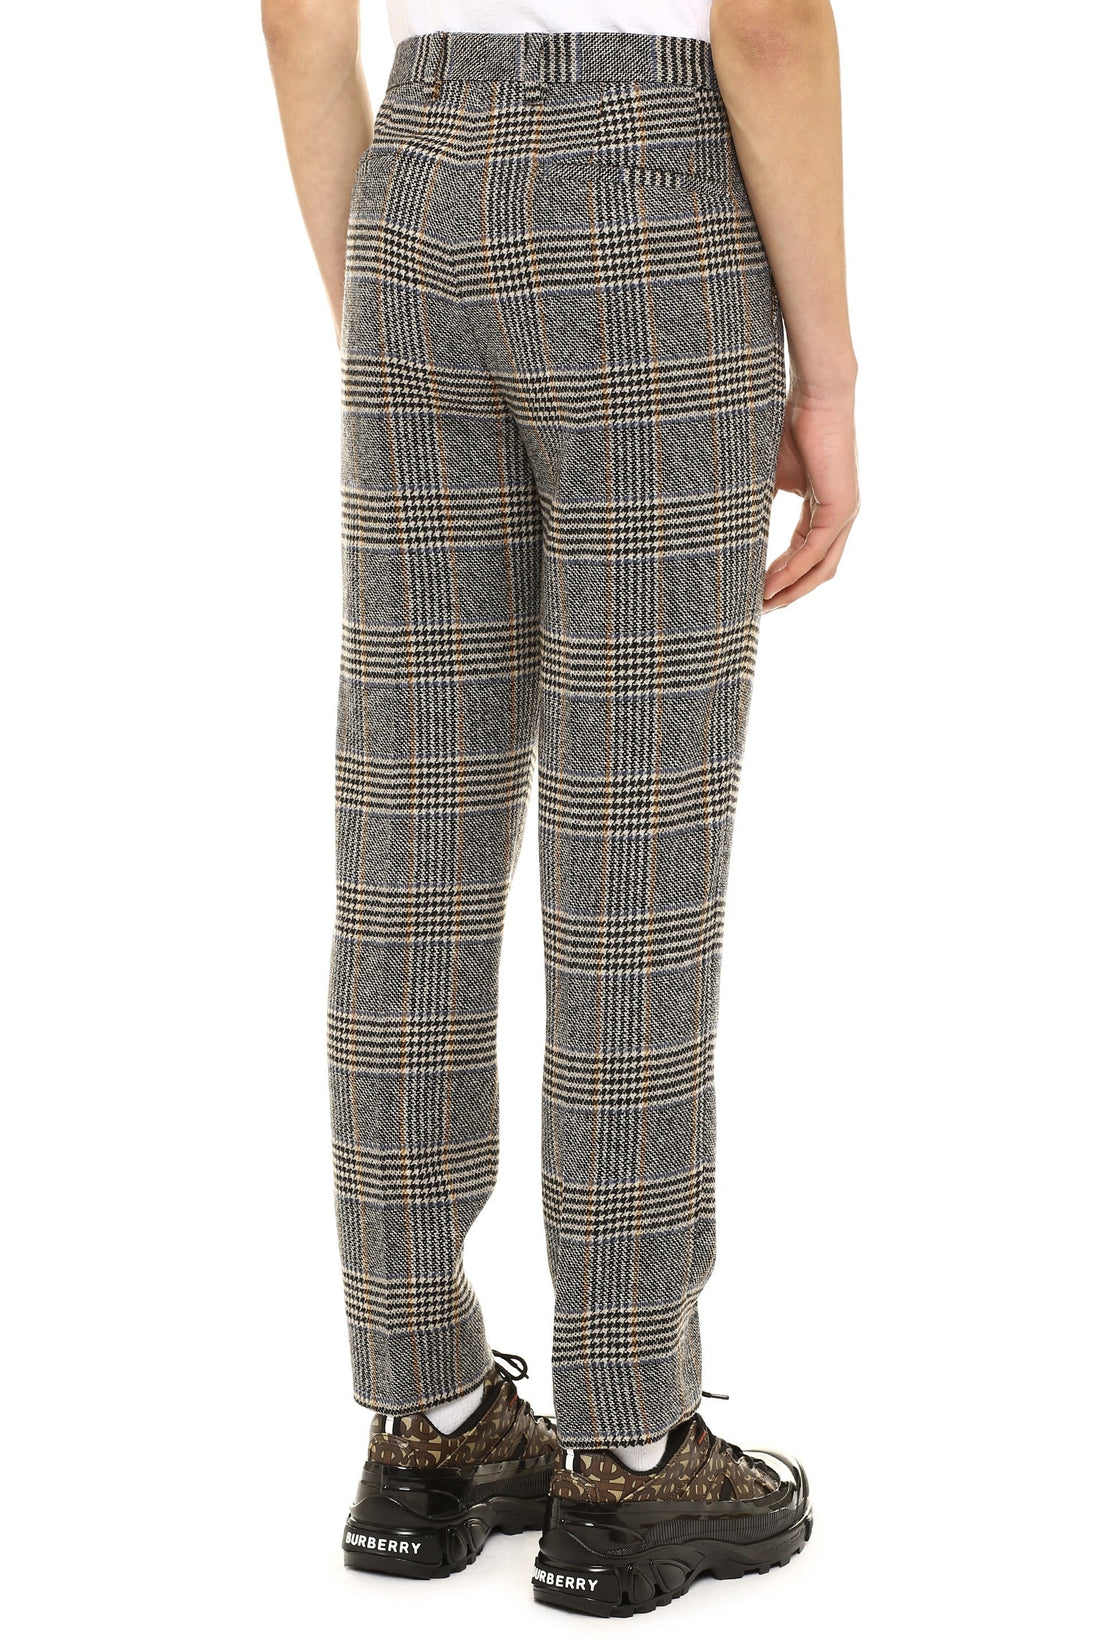 Dolce & Gabbana-OUTLET-SALE-Prince of Wales check wool trousers-ARCHIVIST